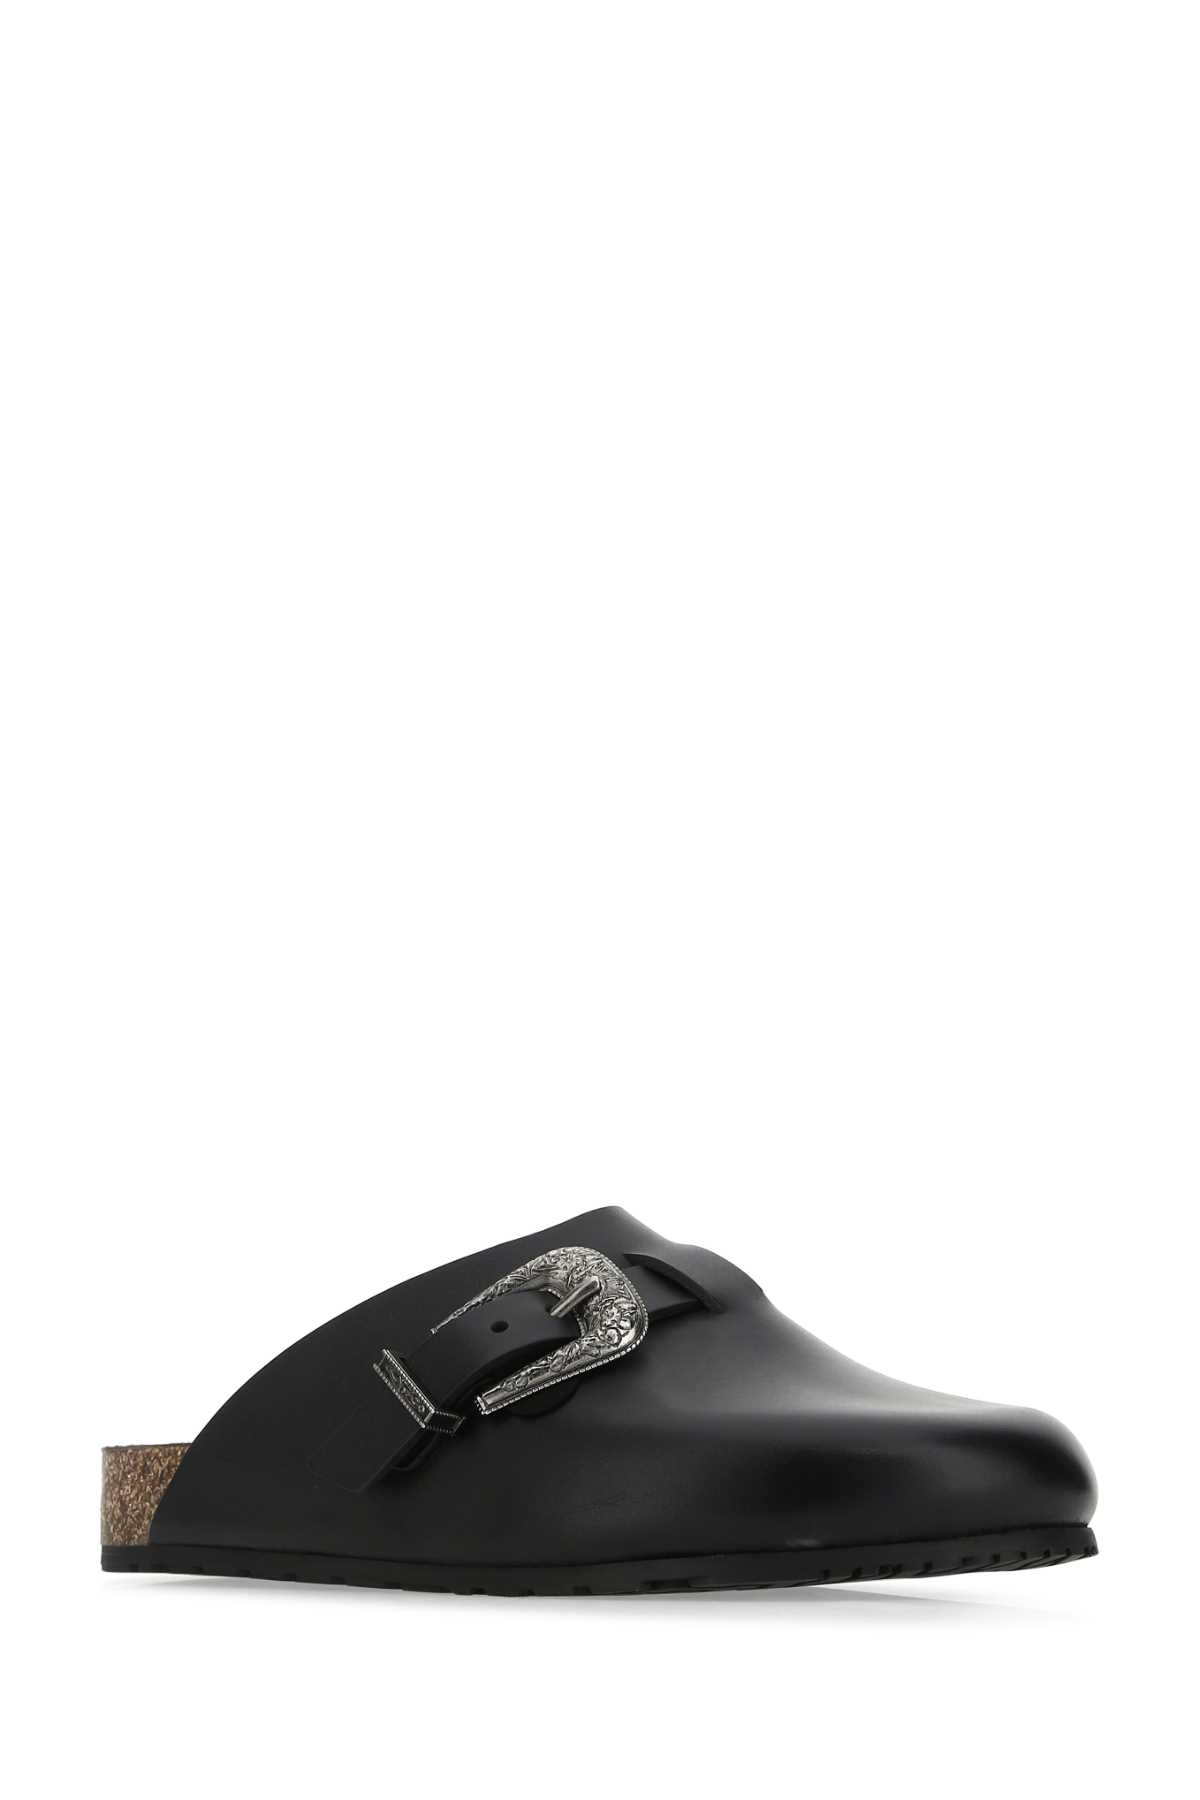 Saint Laurent Black Leather Slippers In 1000